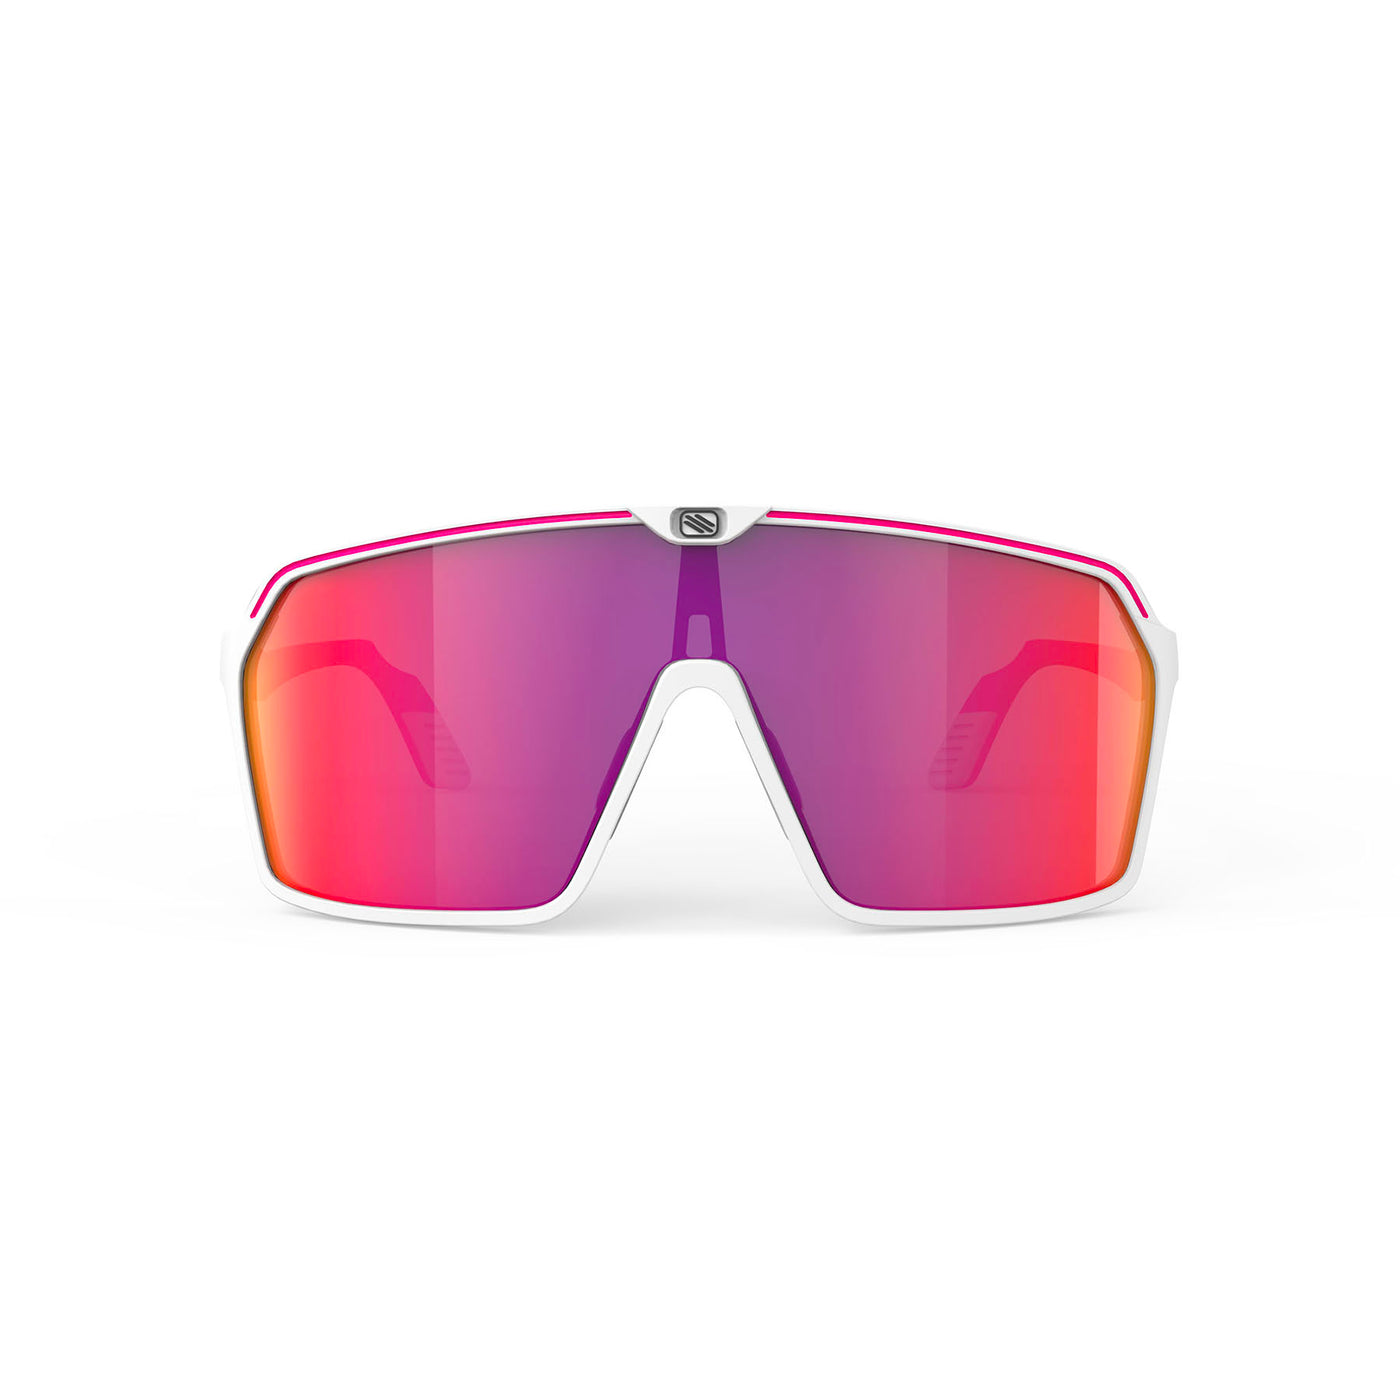 Rudy Project, Spinshield, Lifestyle Sunglasses